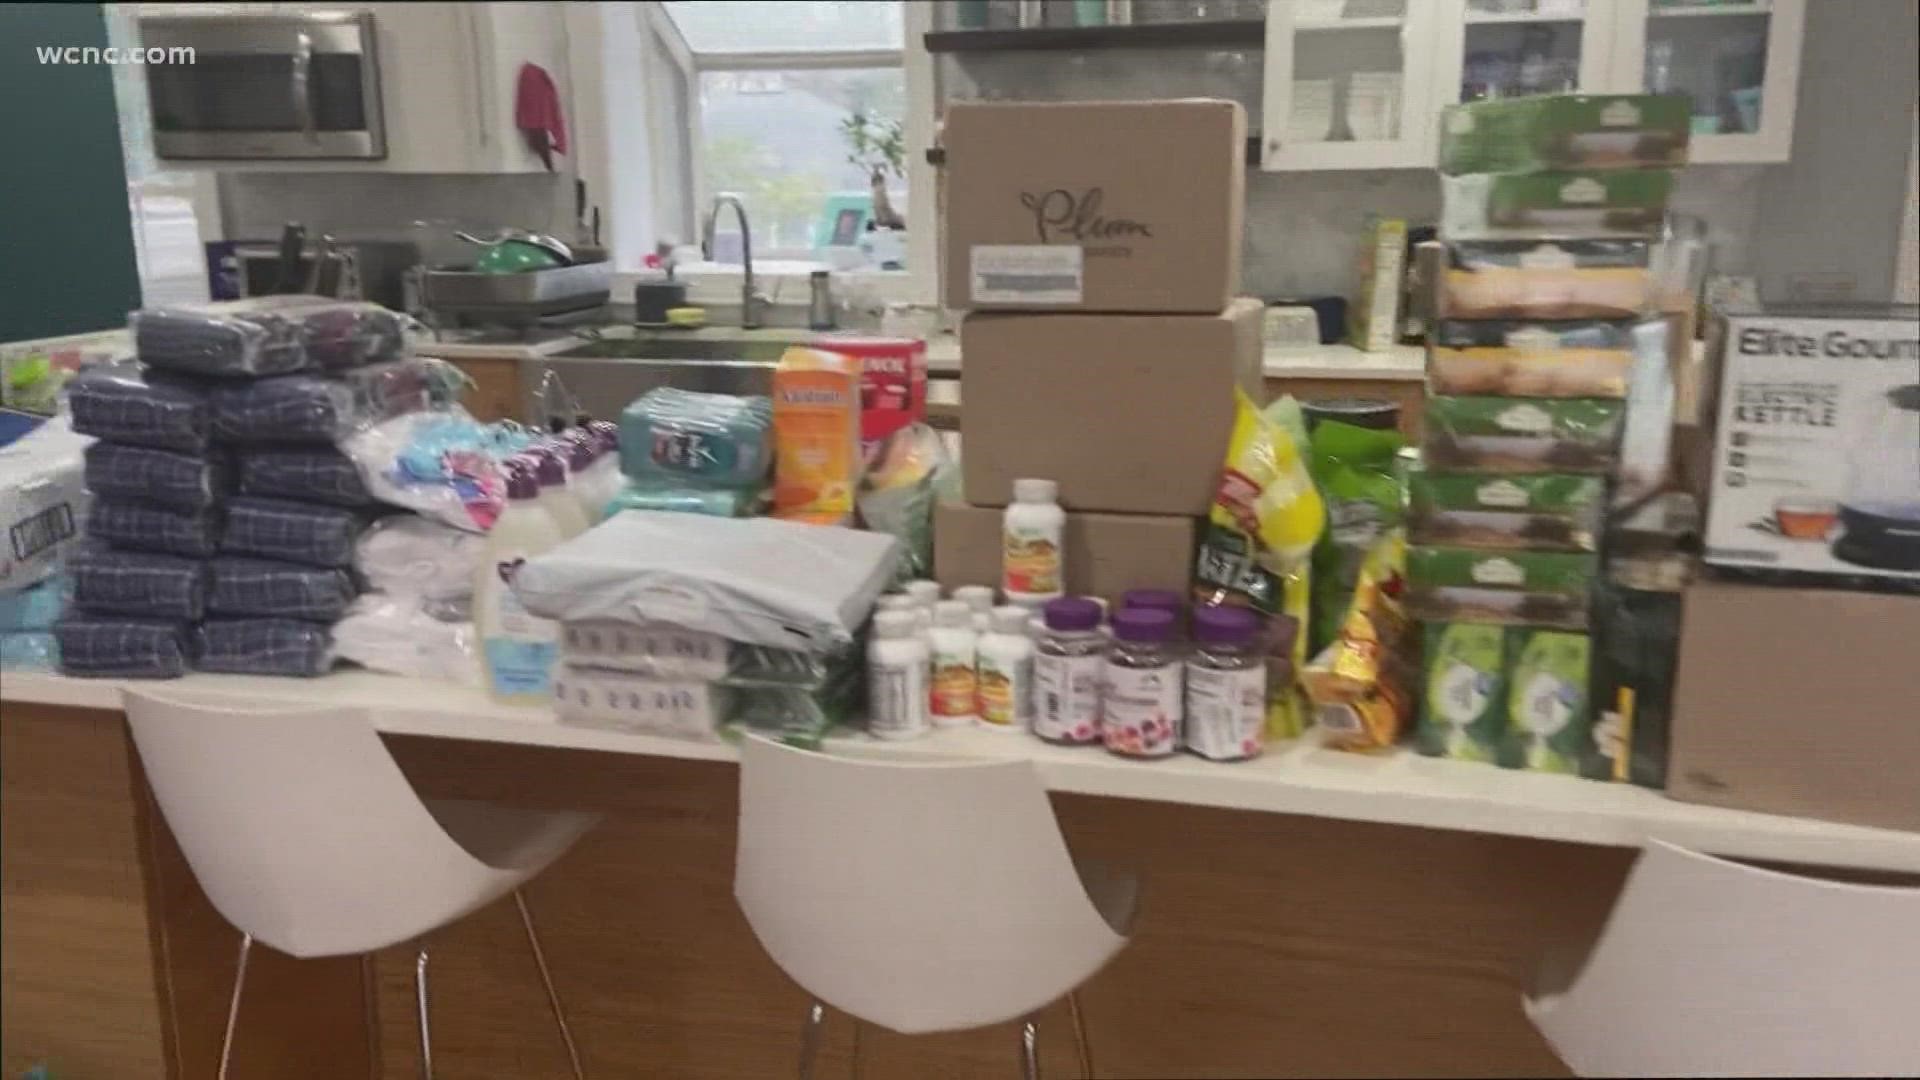 Many refugees are still awaiting permanent housing, access to food stamps, and Medicaid. In the meantime, some in the community are making it their mission to help.